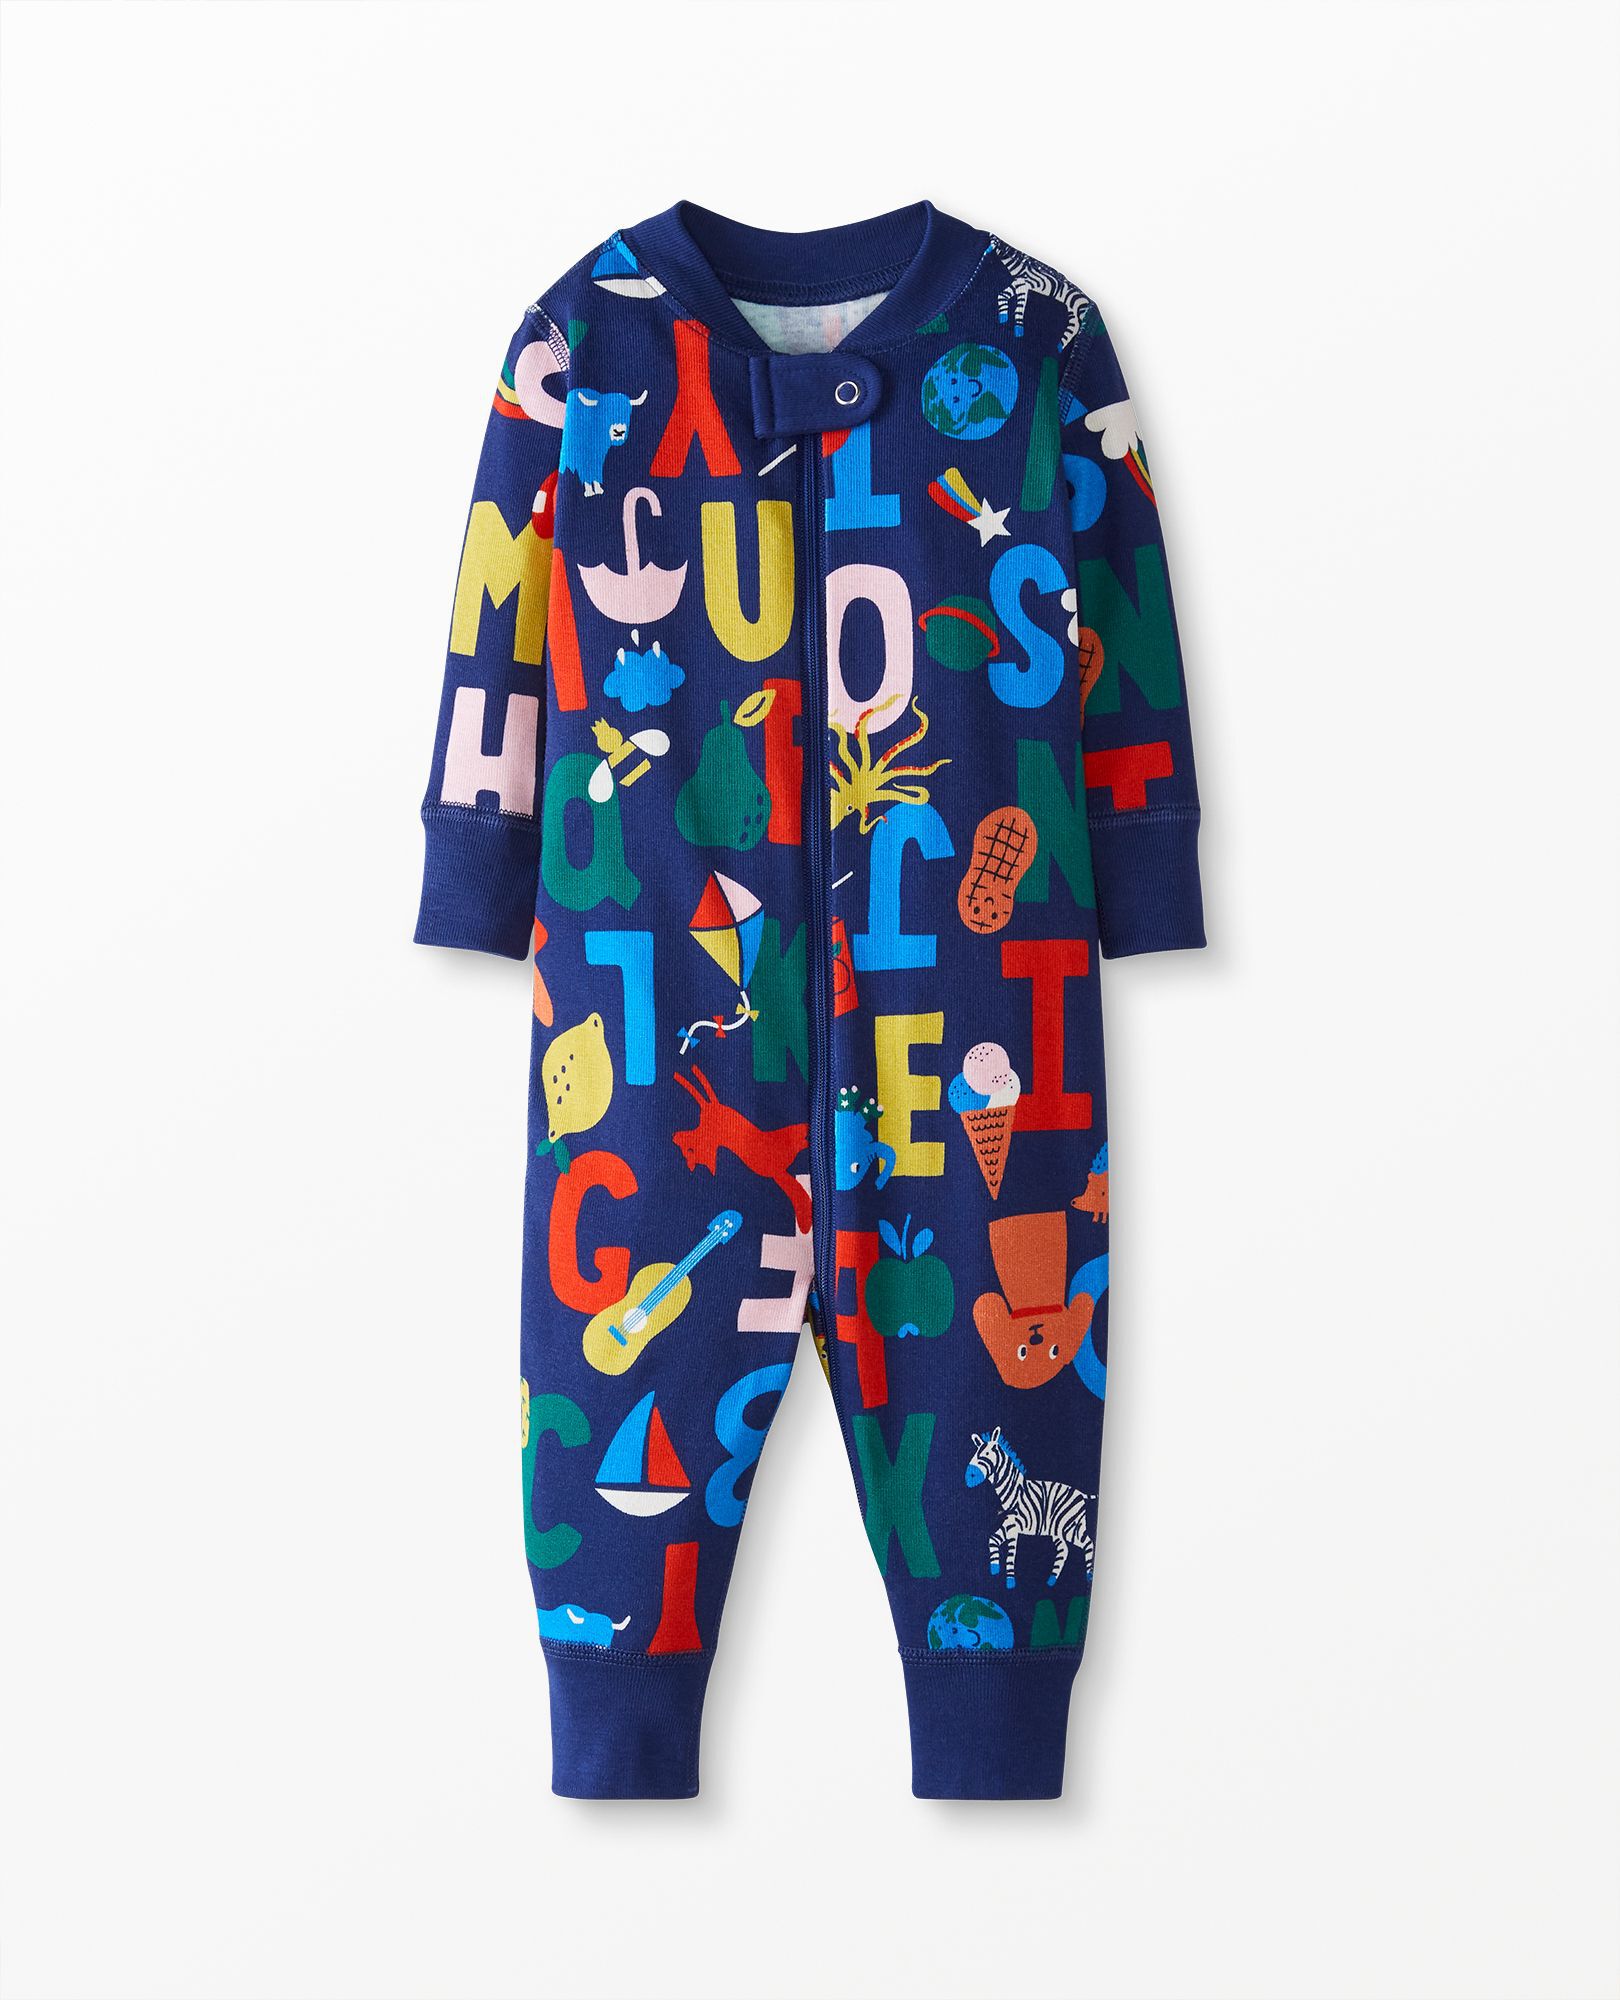 NEW HANNA ANDERSSON Baby Boy Blue Igloo One Piece Pajamas 6-9 months Size 60 